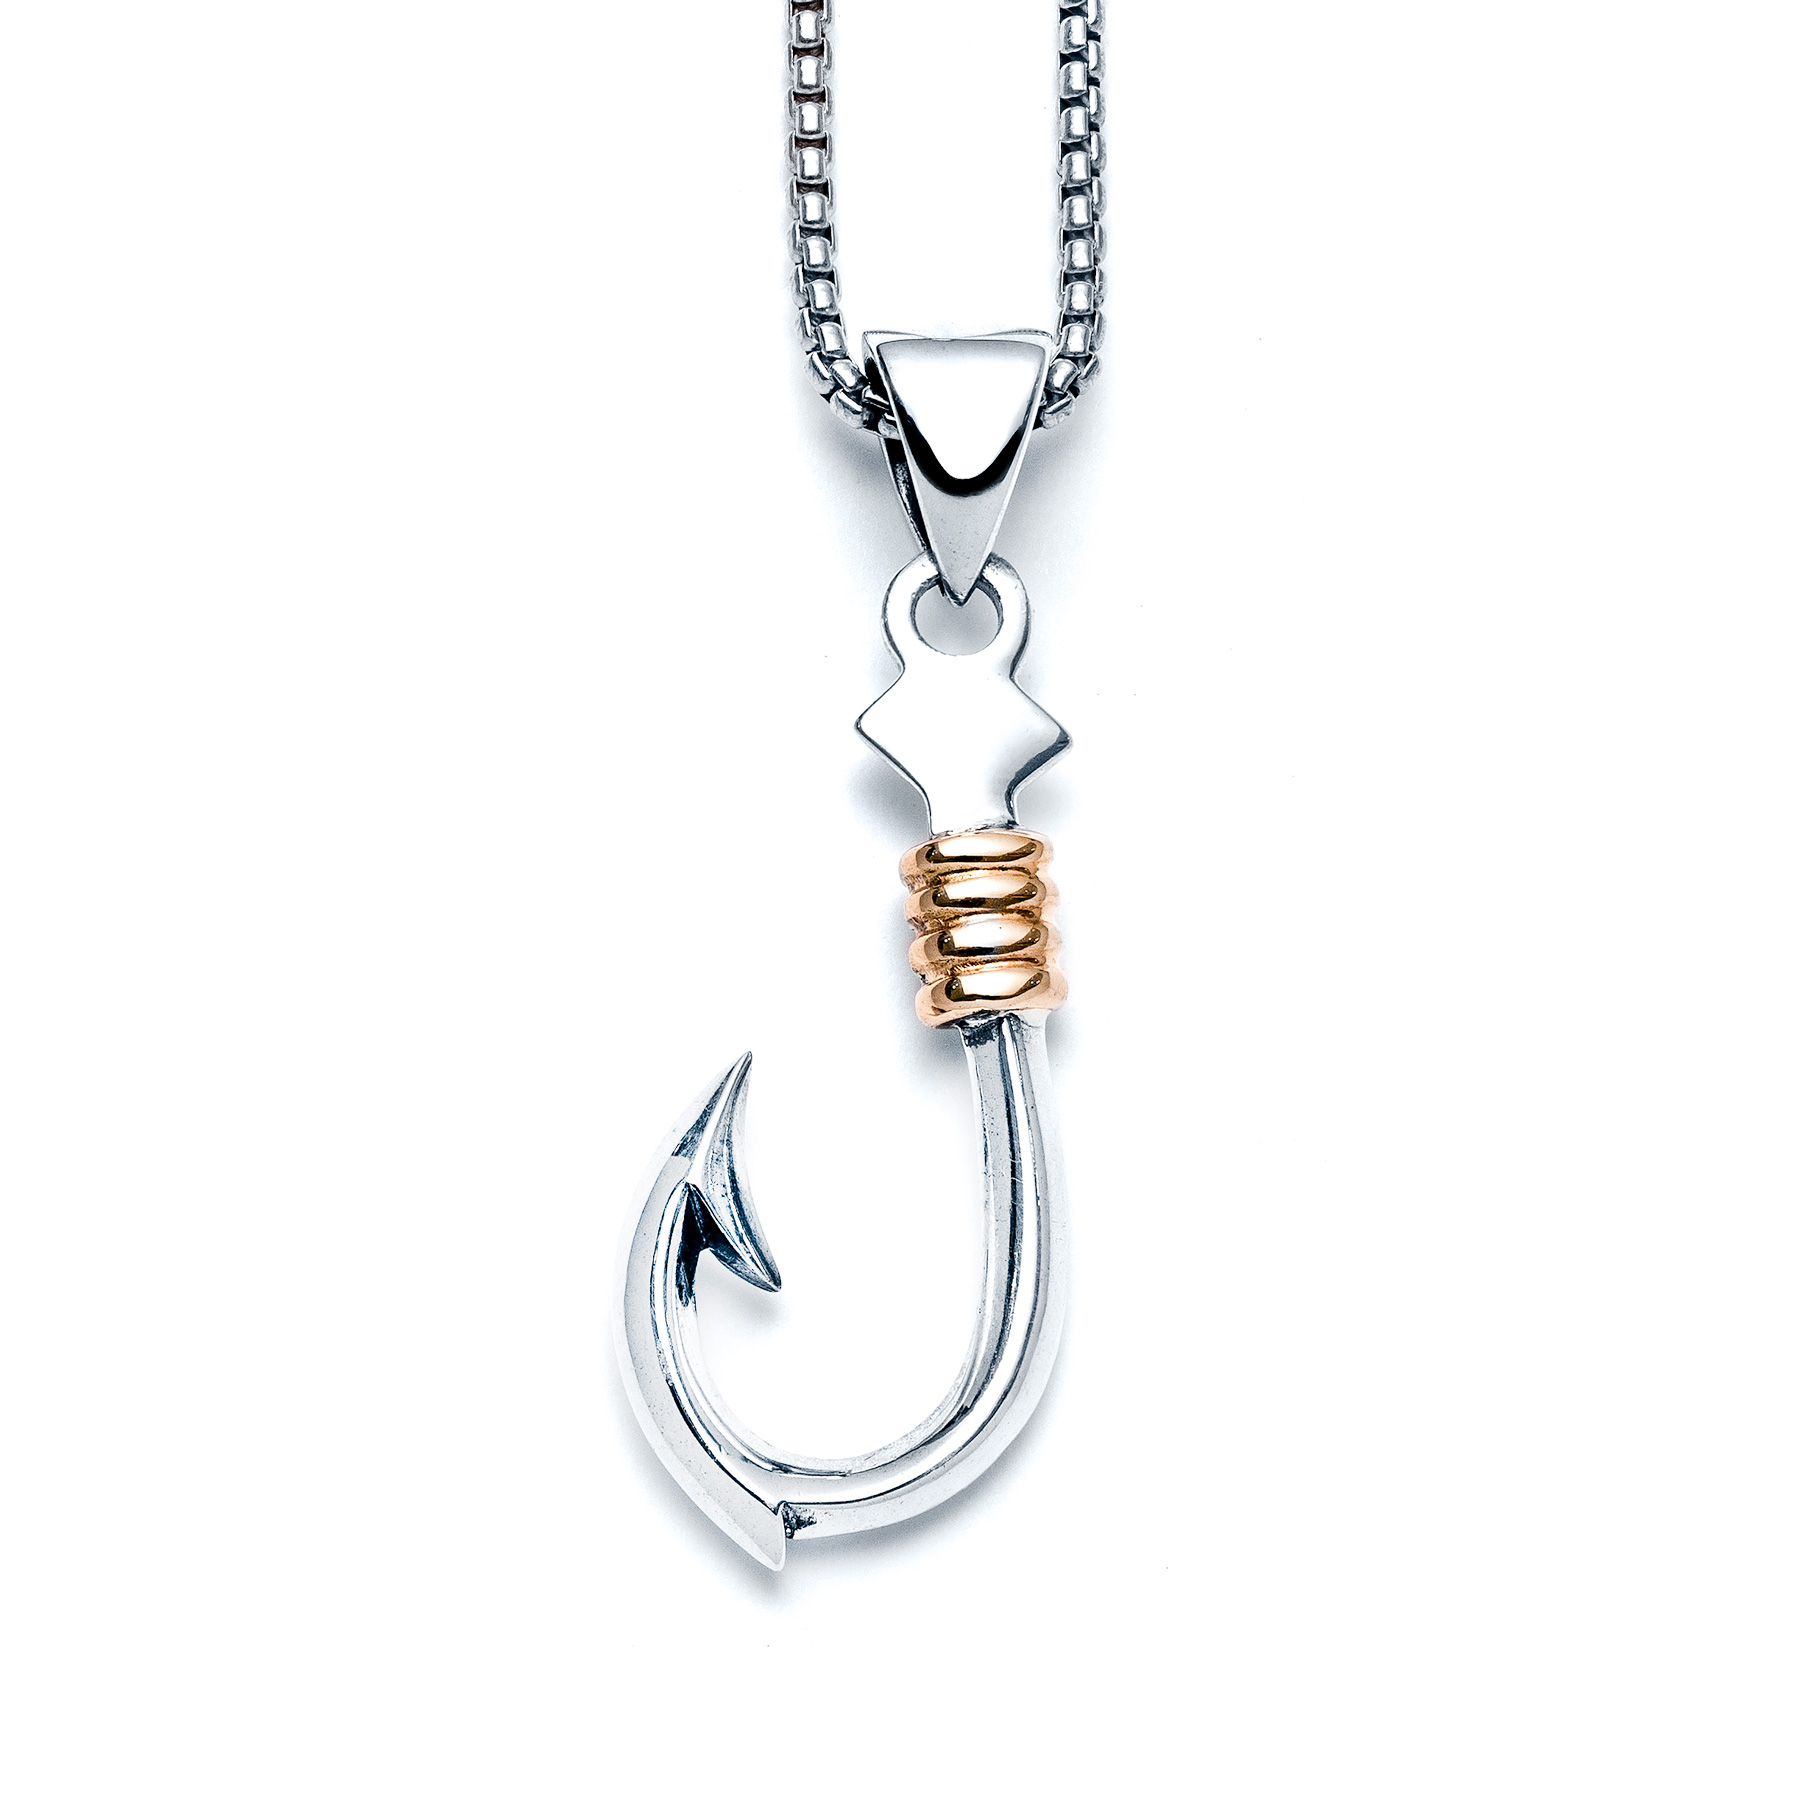 Two Tone Small Fish Hook Necklace in Sterling Silver With 14k Gold